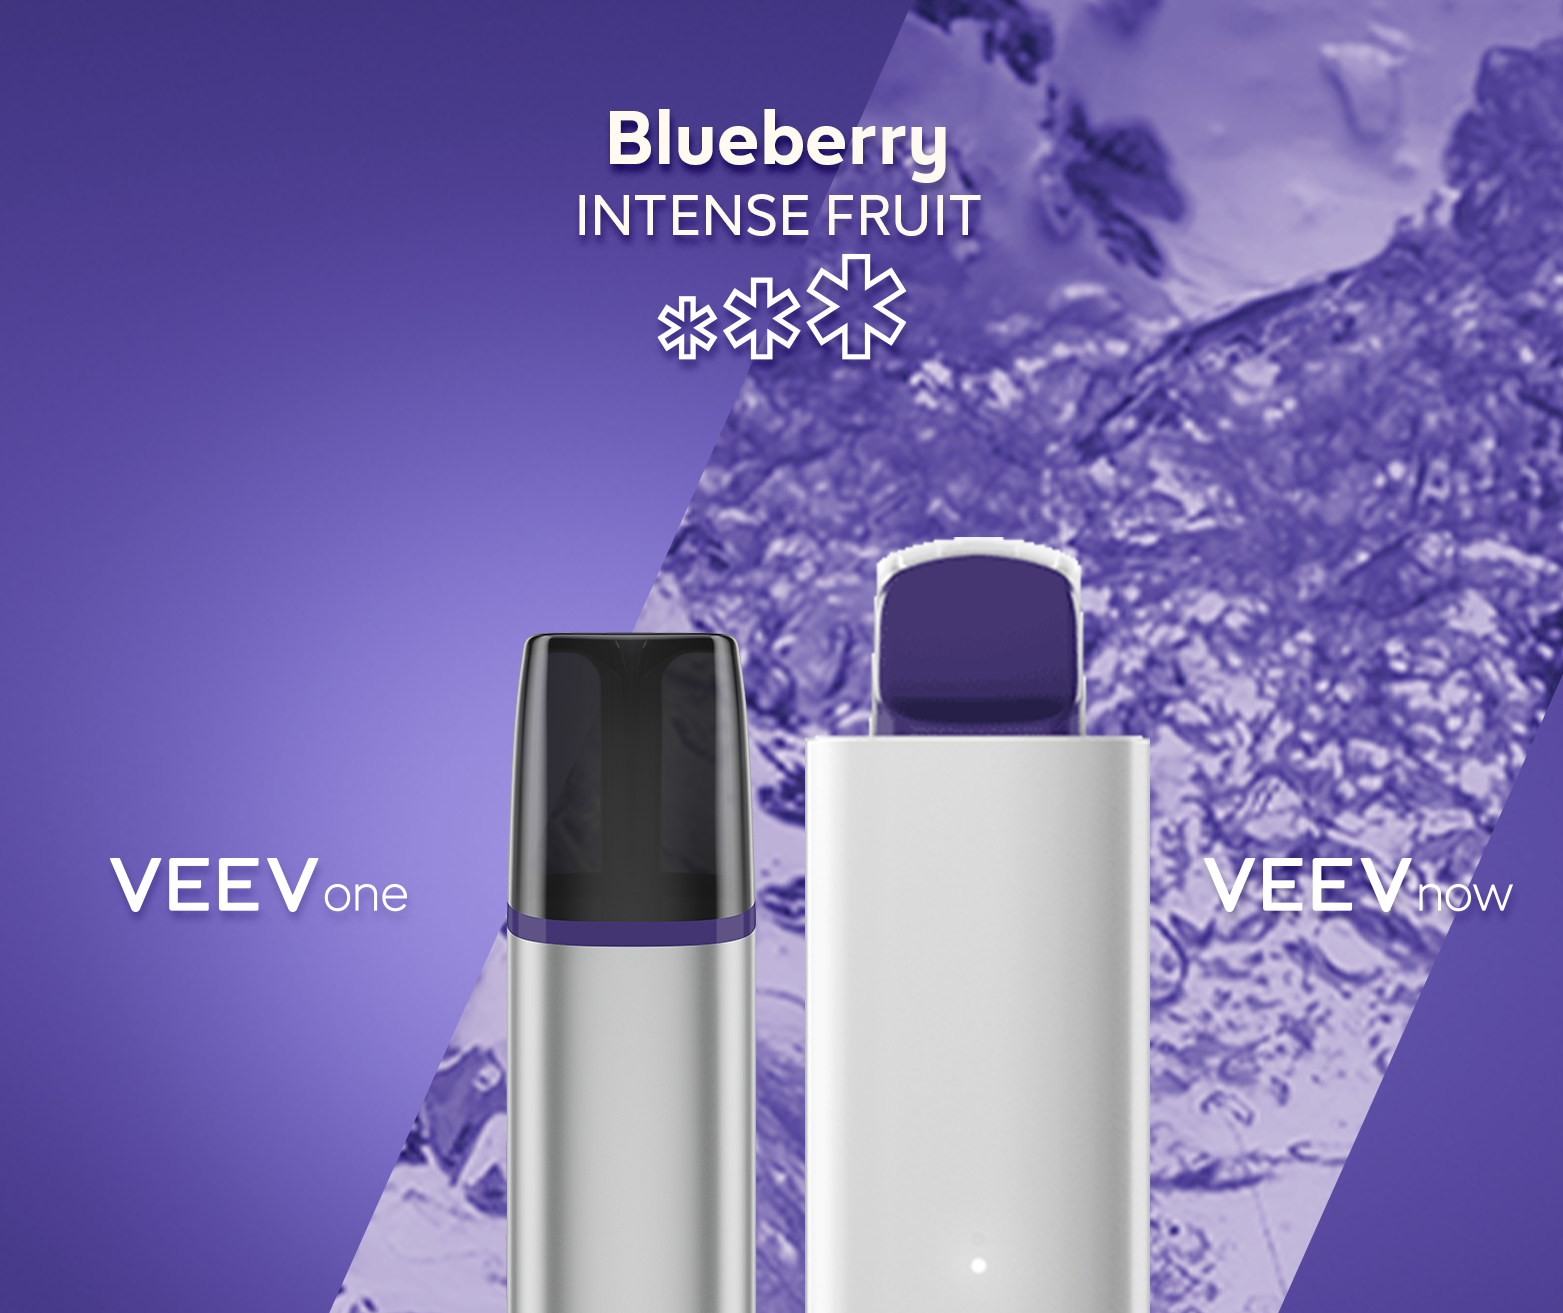 Bluebery VEEV ONE device and VEEV NOW 5 mL disposable- Intense Fruit